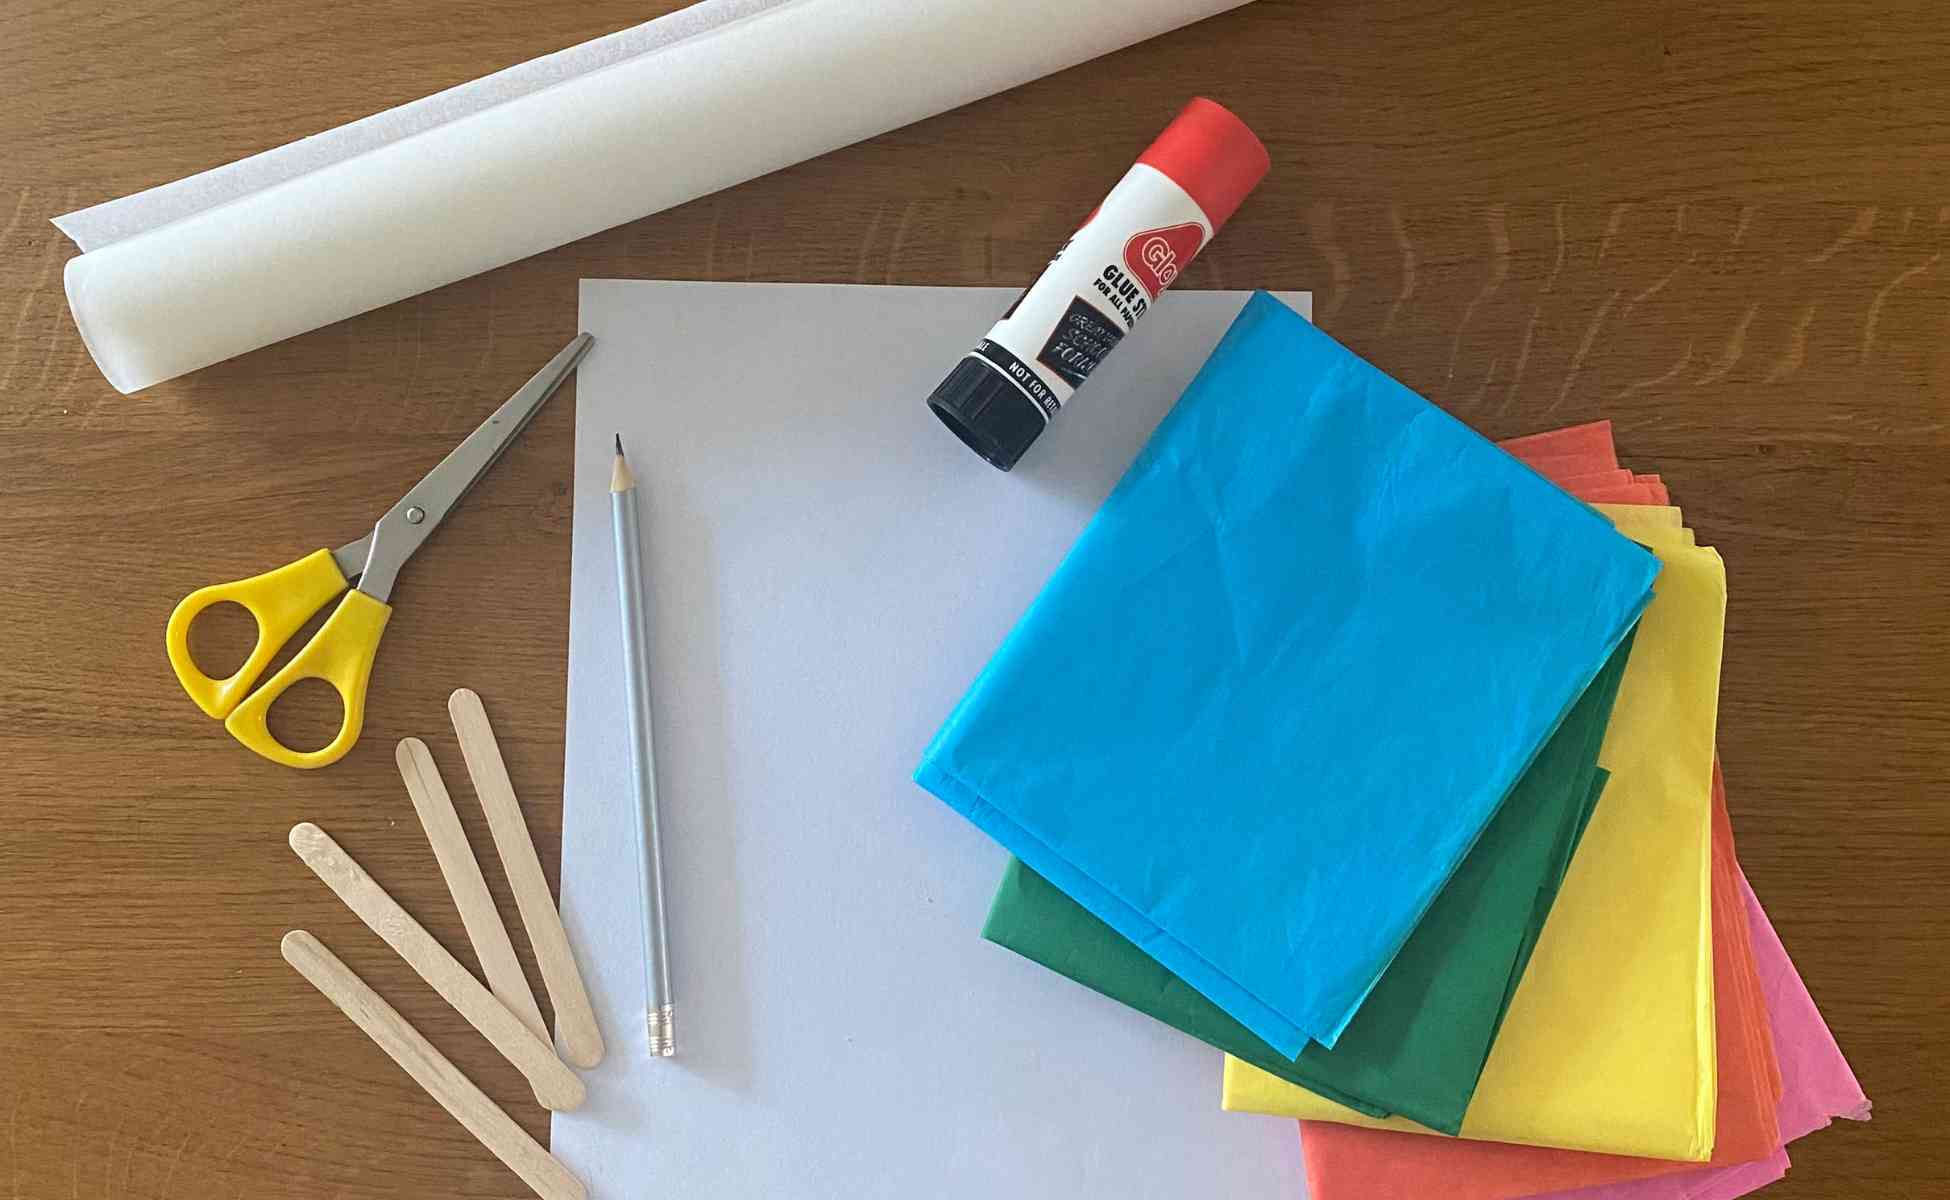 Everything you need for Window Art activity including coloured tissue paper, greaseproof paper, scissors, glue and lollypop sticks.